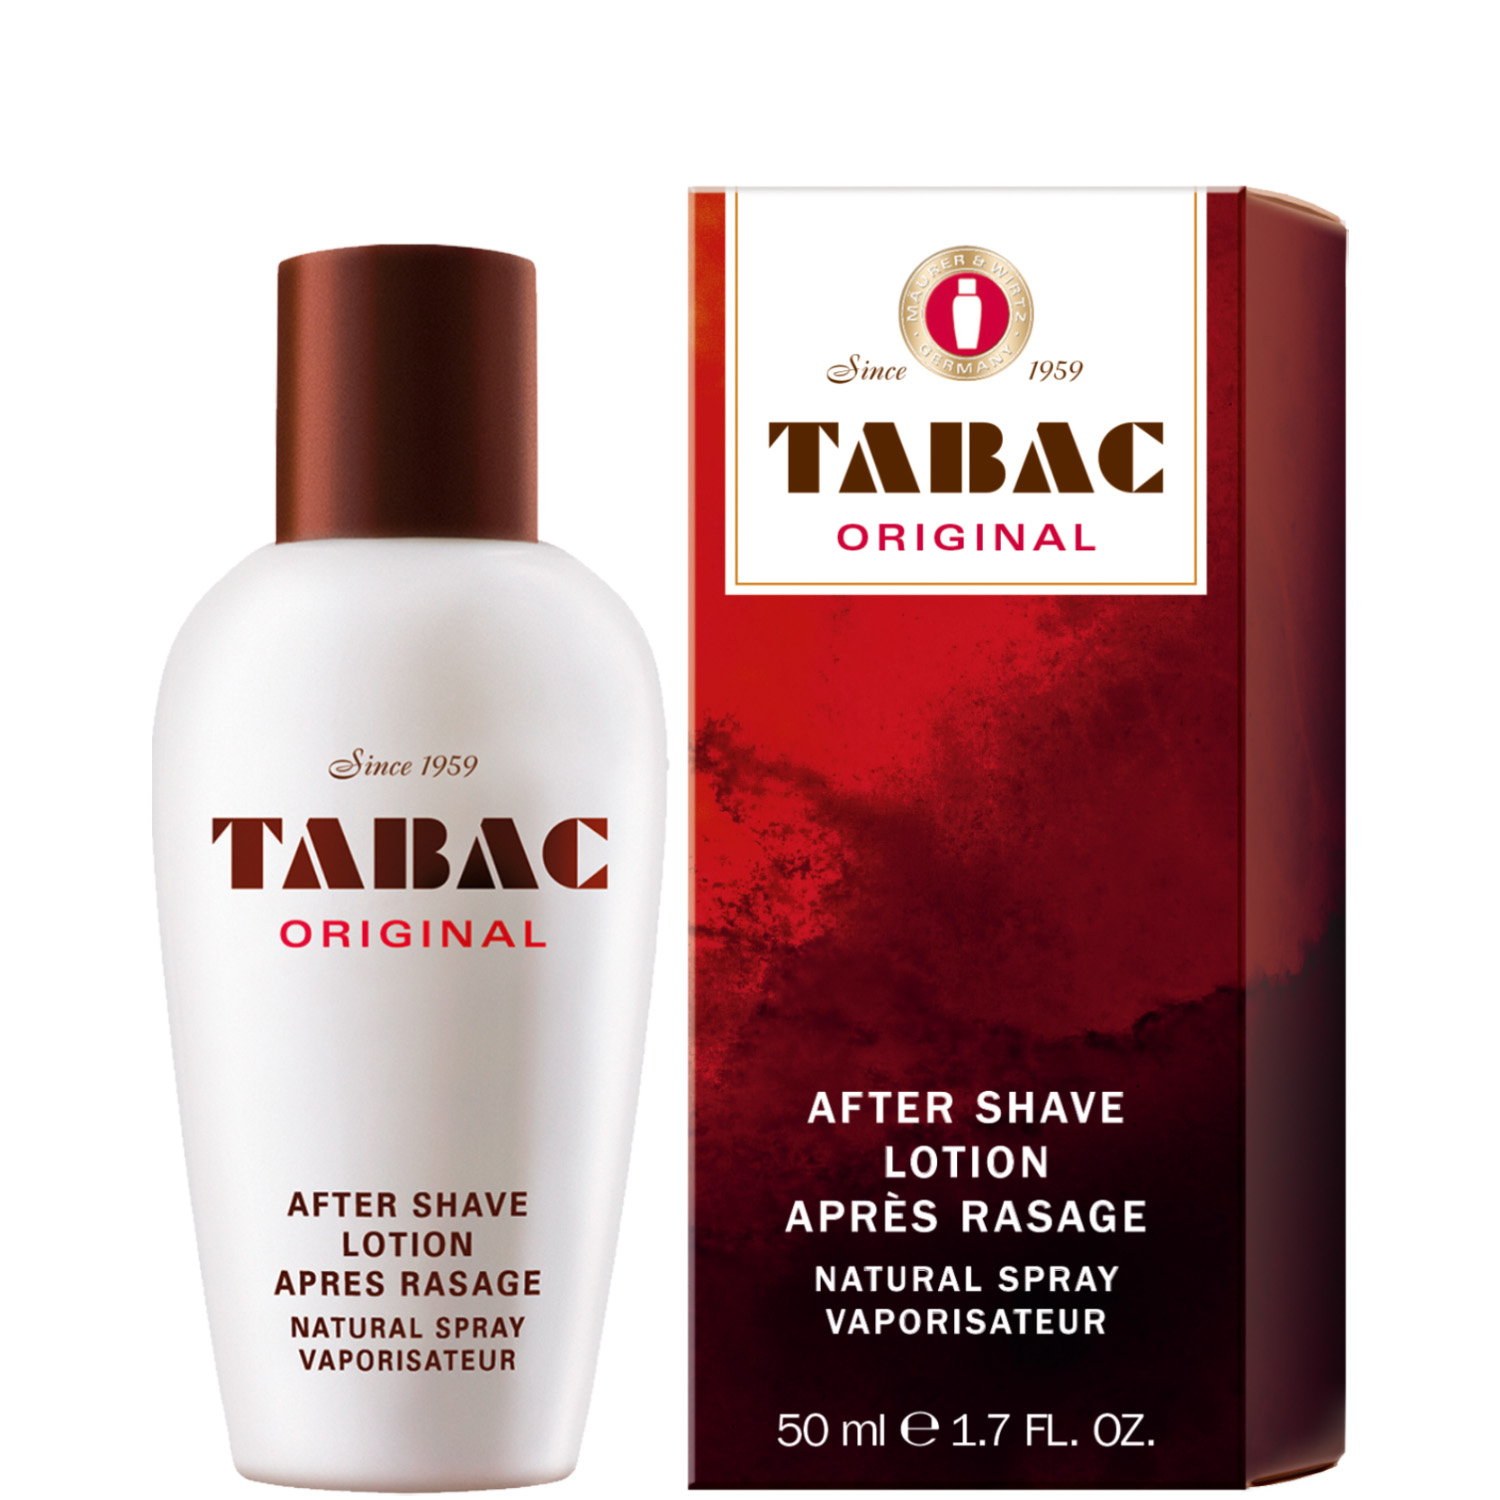 Tabac Original After Shave Lotion Natural Spray 50ml